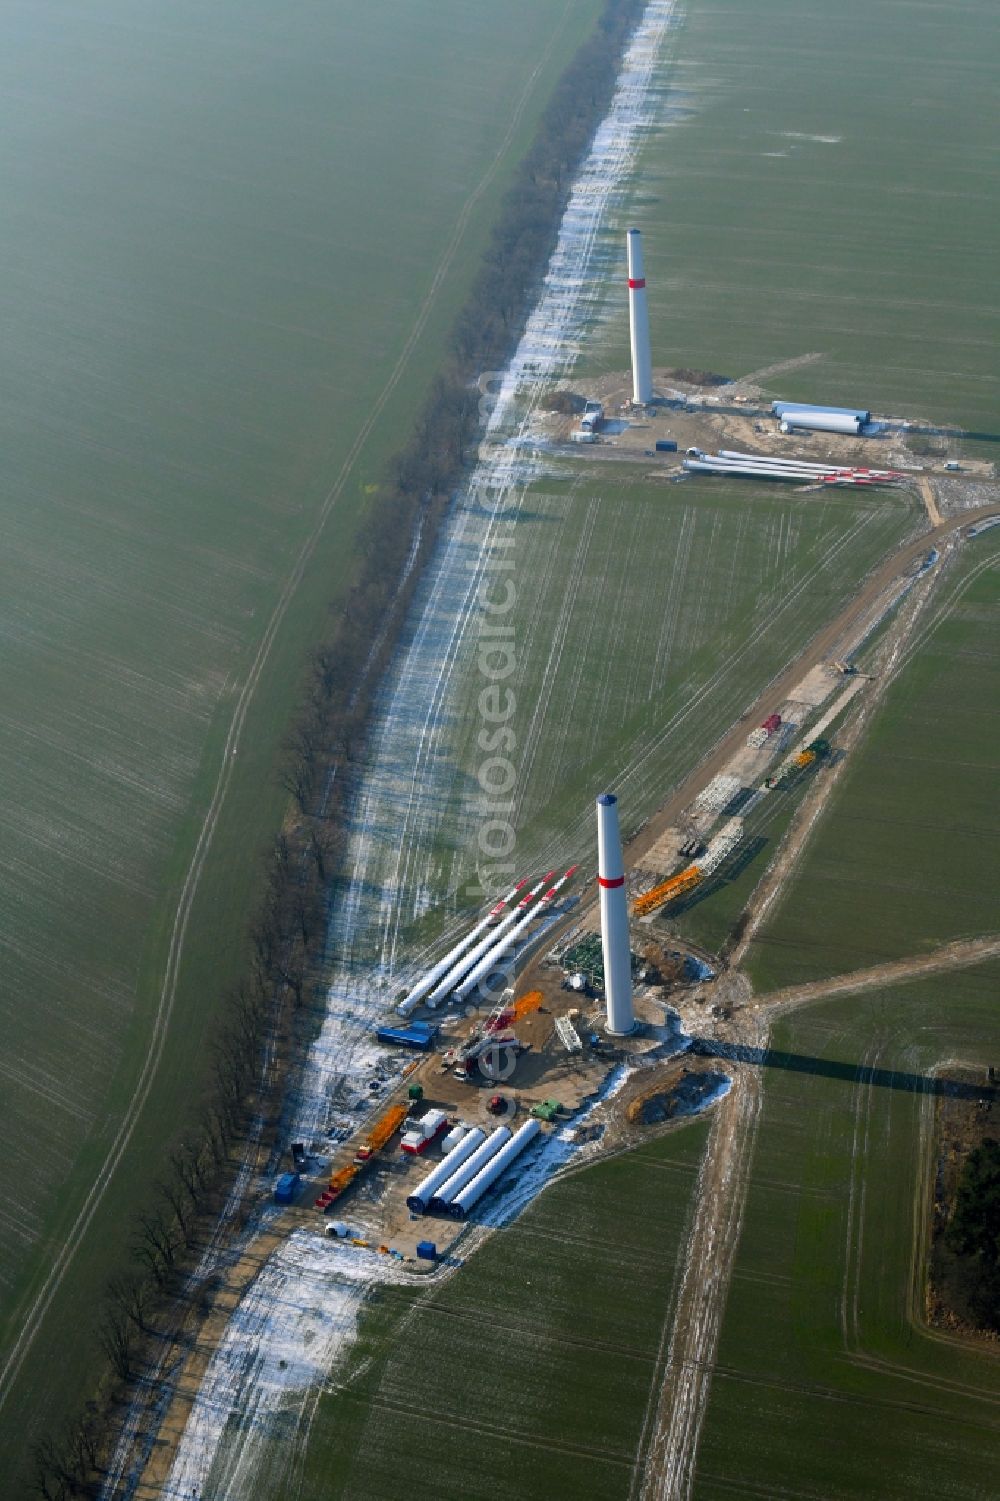 Aerial photograph Willmersdorf - Construction site for wind turbine installation on fields in Willmersdorf in the state Brandenburg, Germany